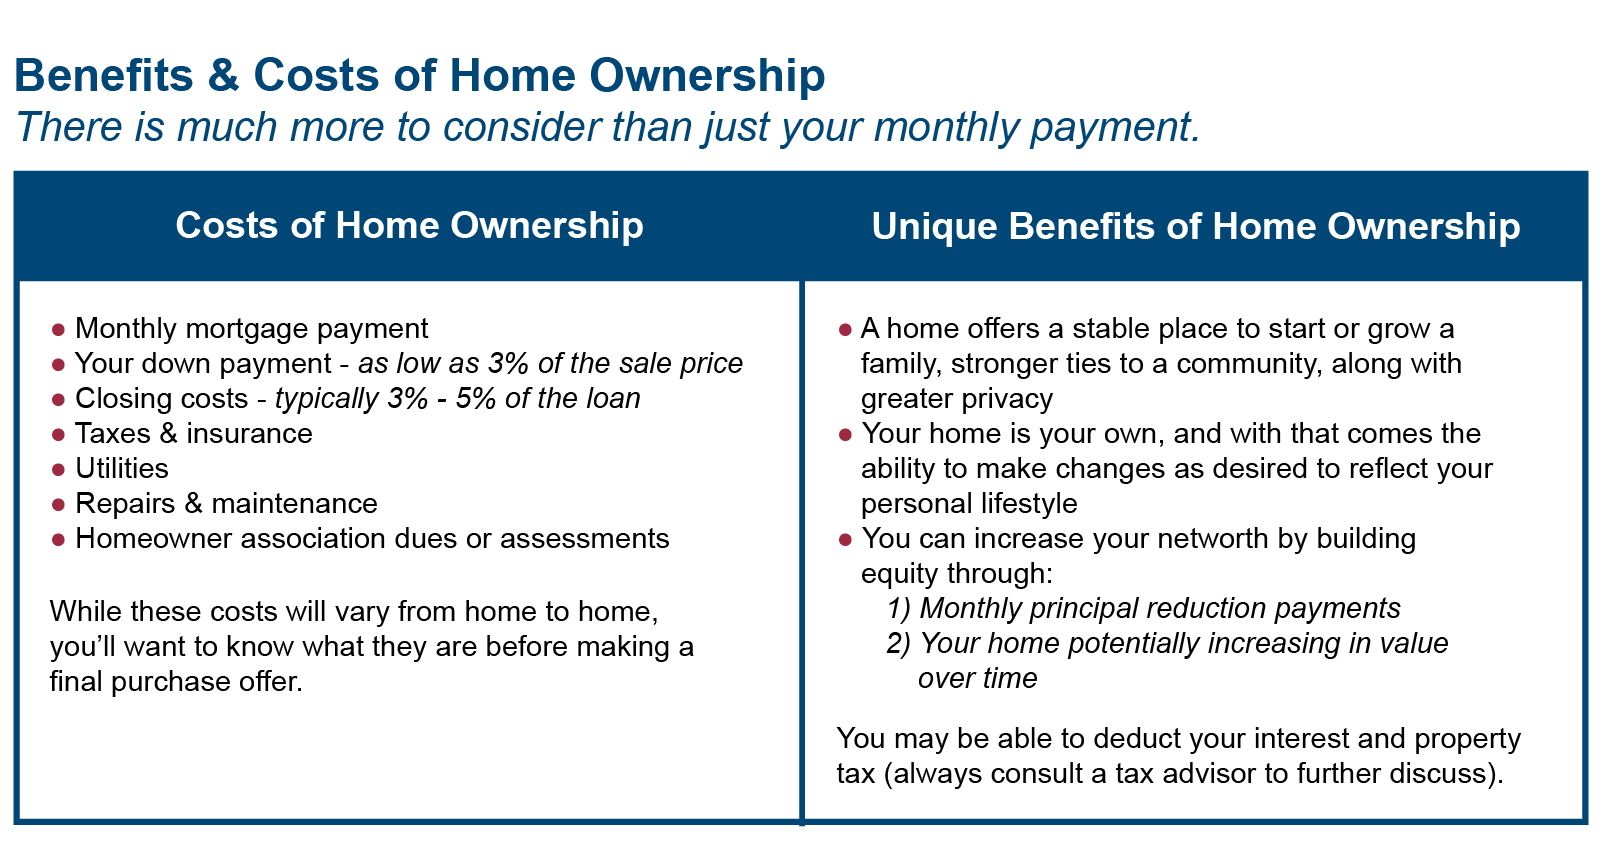 Benefits and Cost of Home Ownership. There is much more to consider than just your monthly payment: costs of home ownership and unique benefits of home ownership.